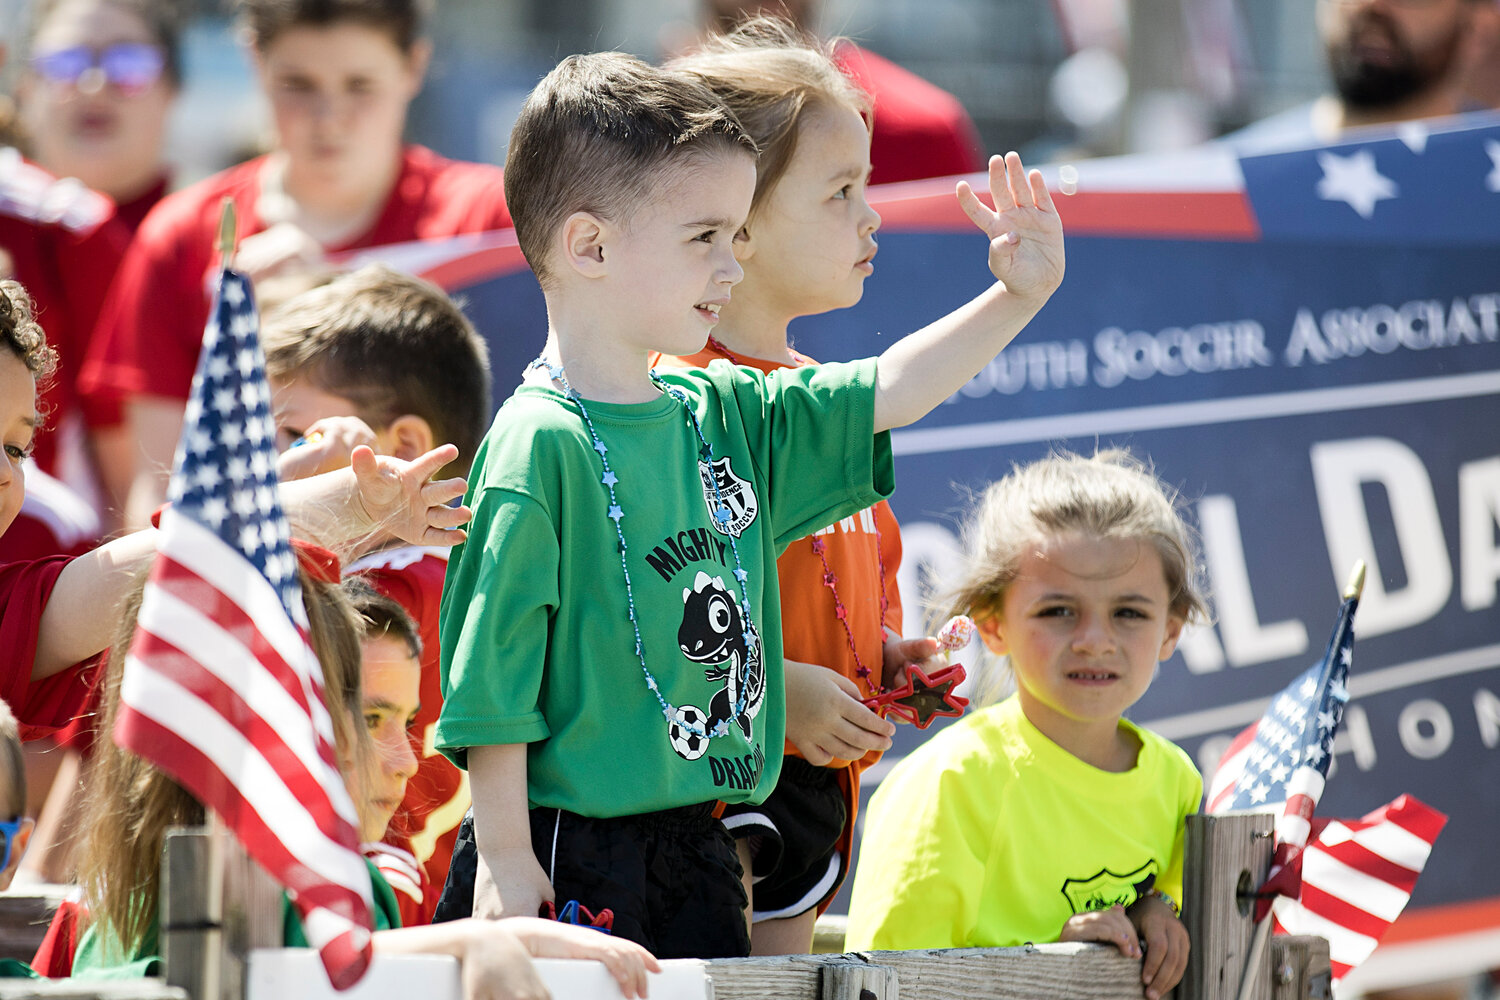 East Providence Youth Soccer player Ryan Murphy waves to spectators.